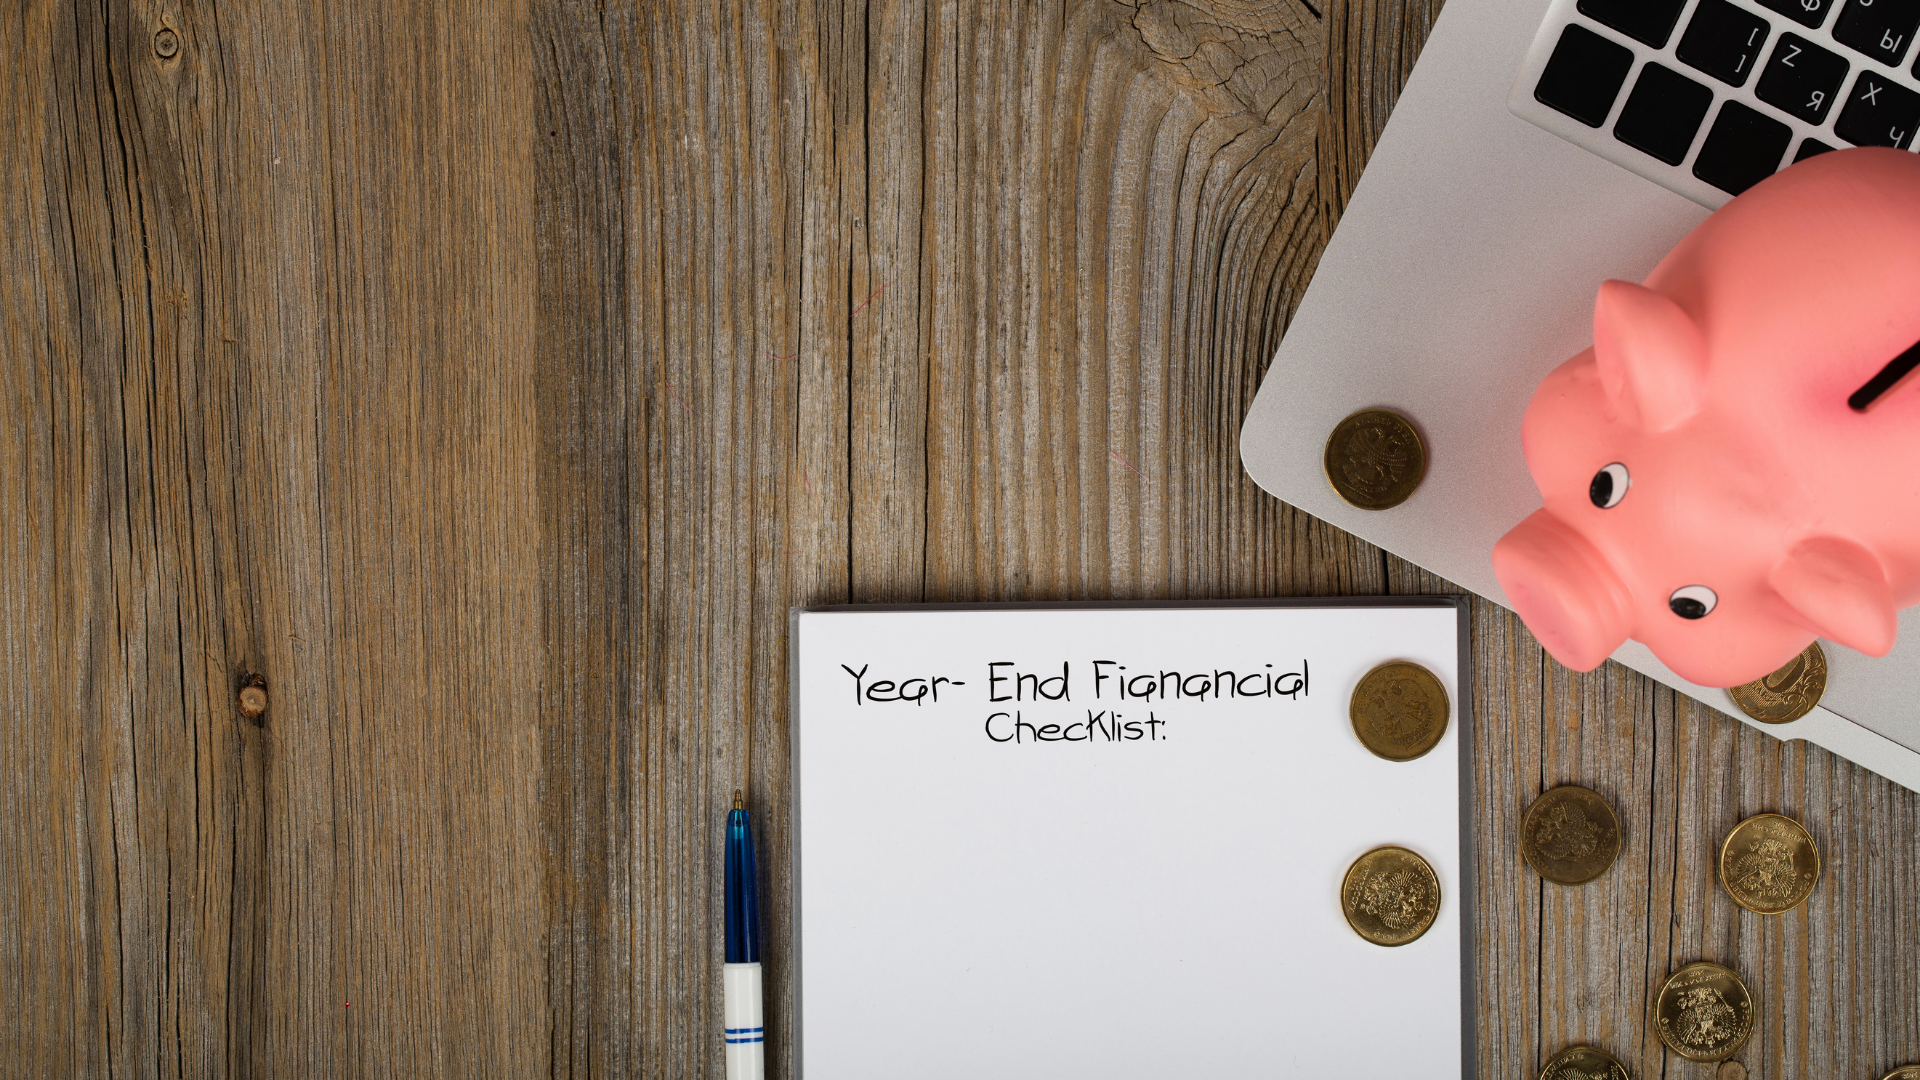 year end financial checklist next to a laptop and small bank